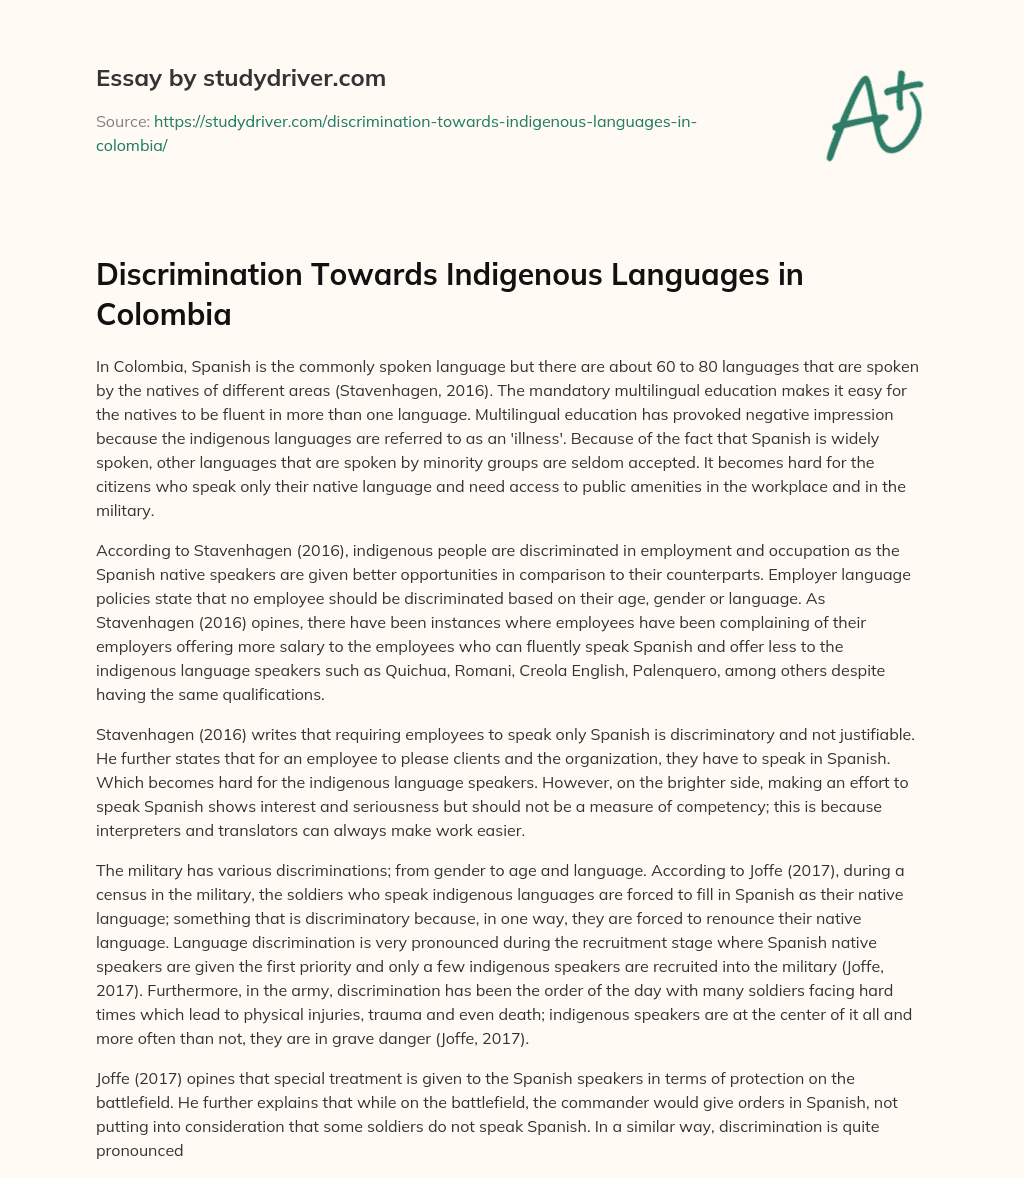 Discrimination Towards Indigenous Languages in Colombia essay